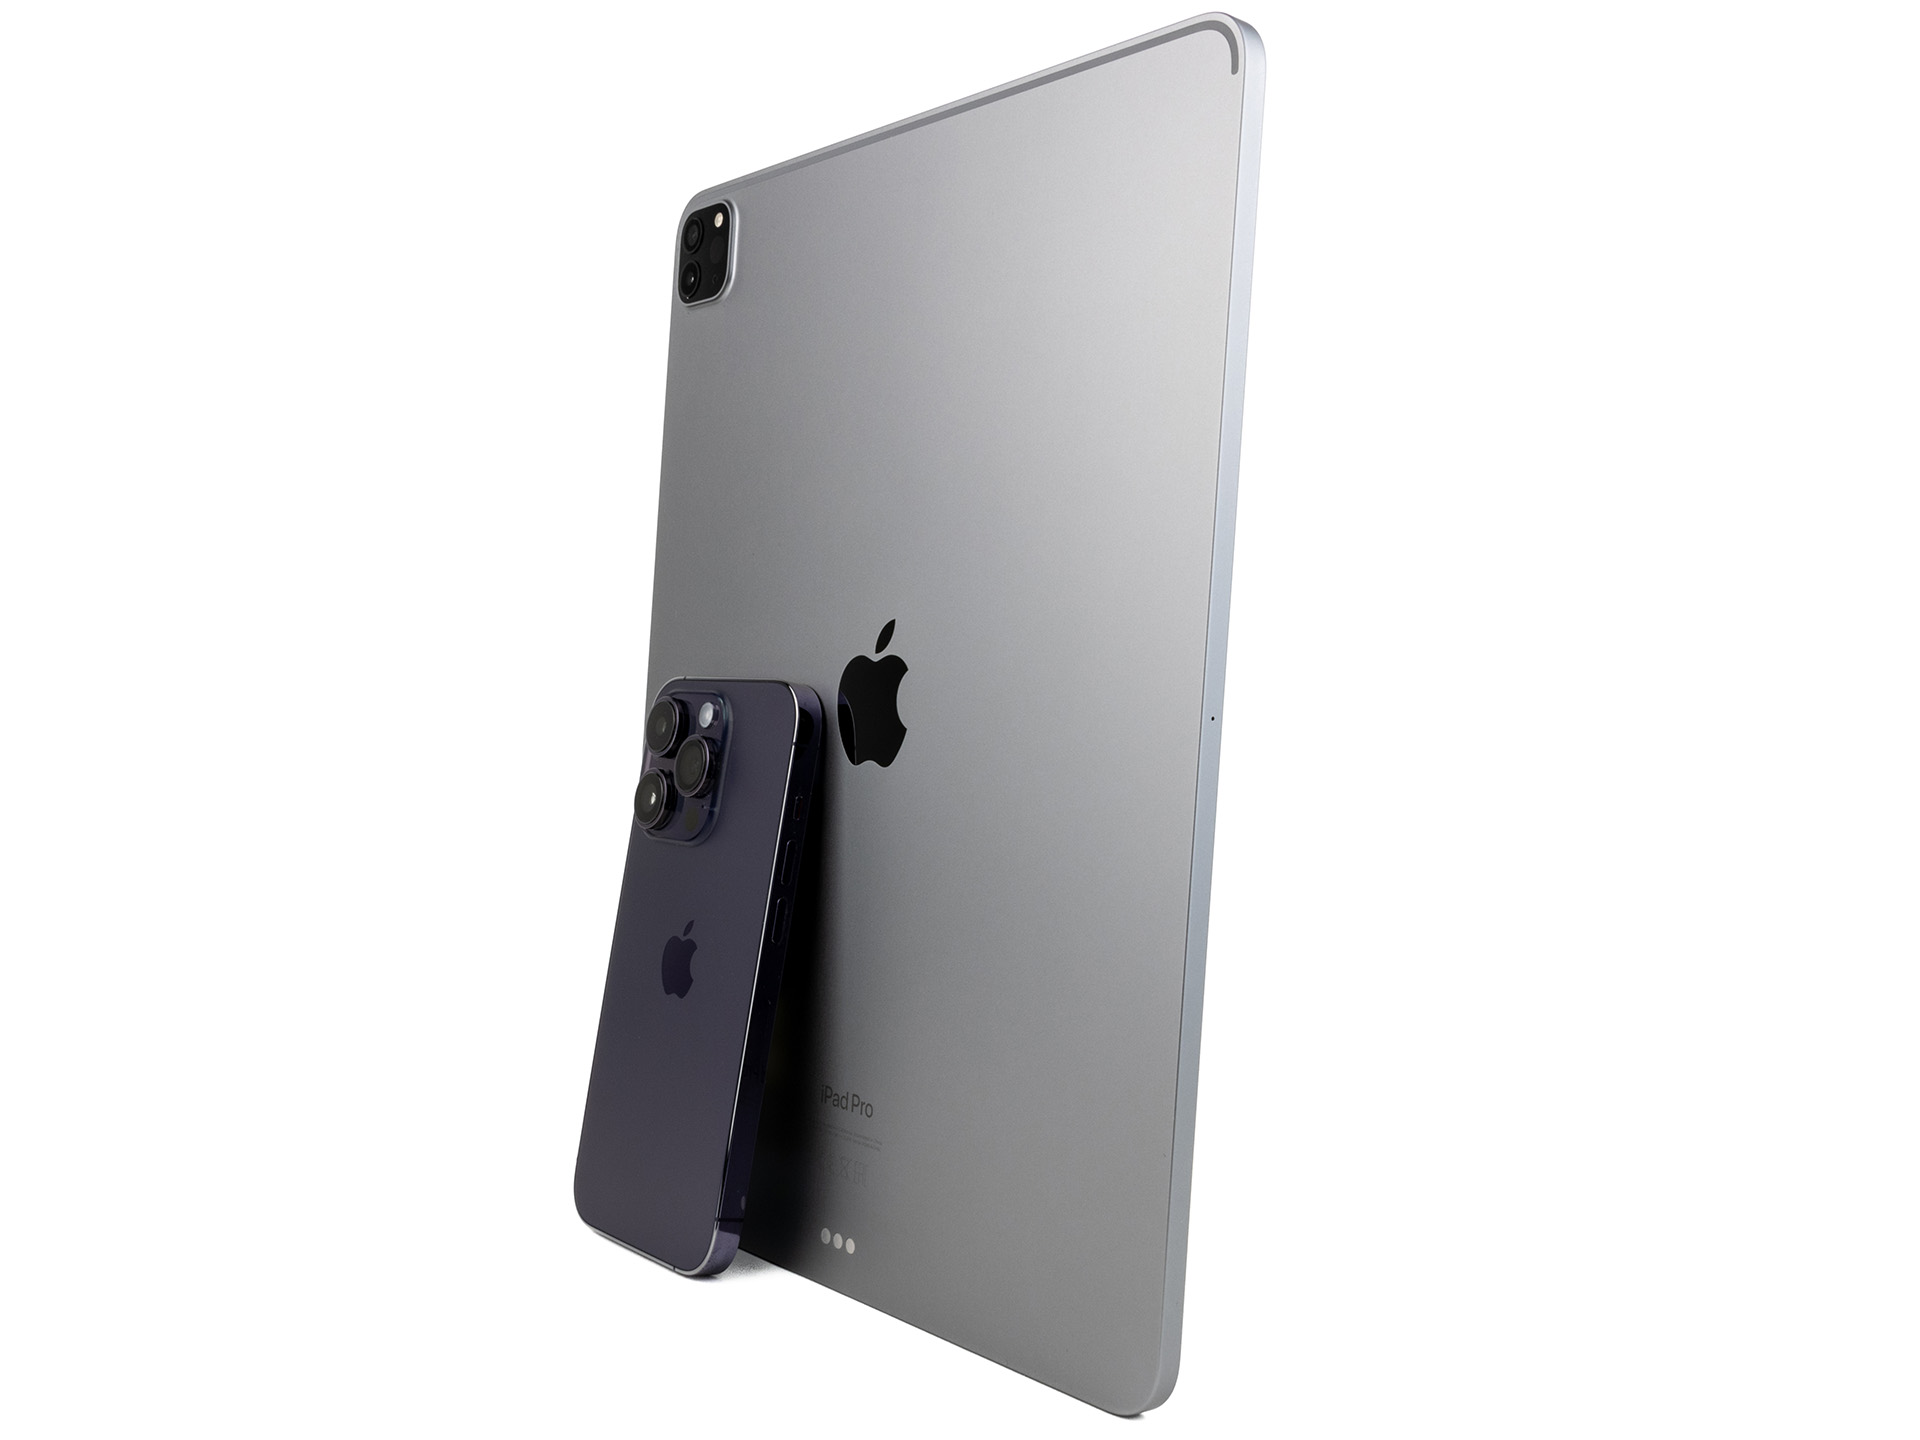 Apple iPad Pro 12.9 (2022): More than a simple model update not